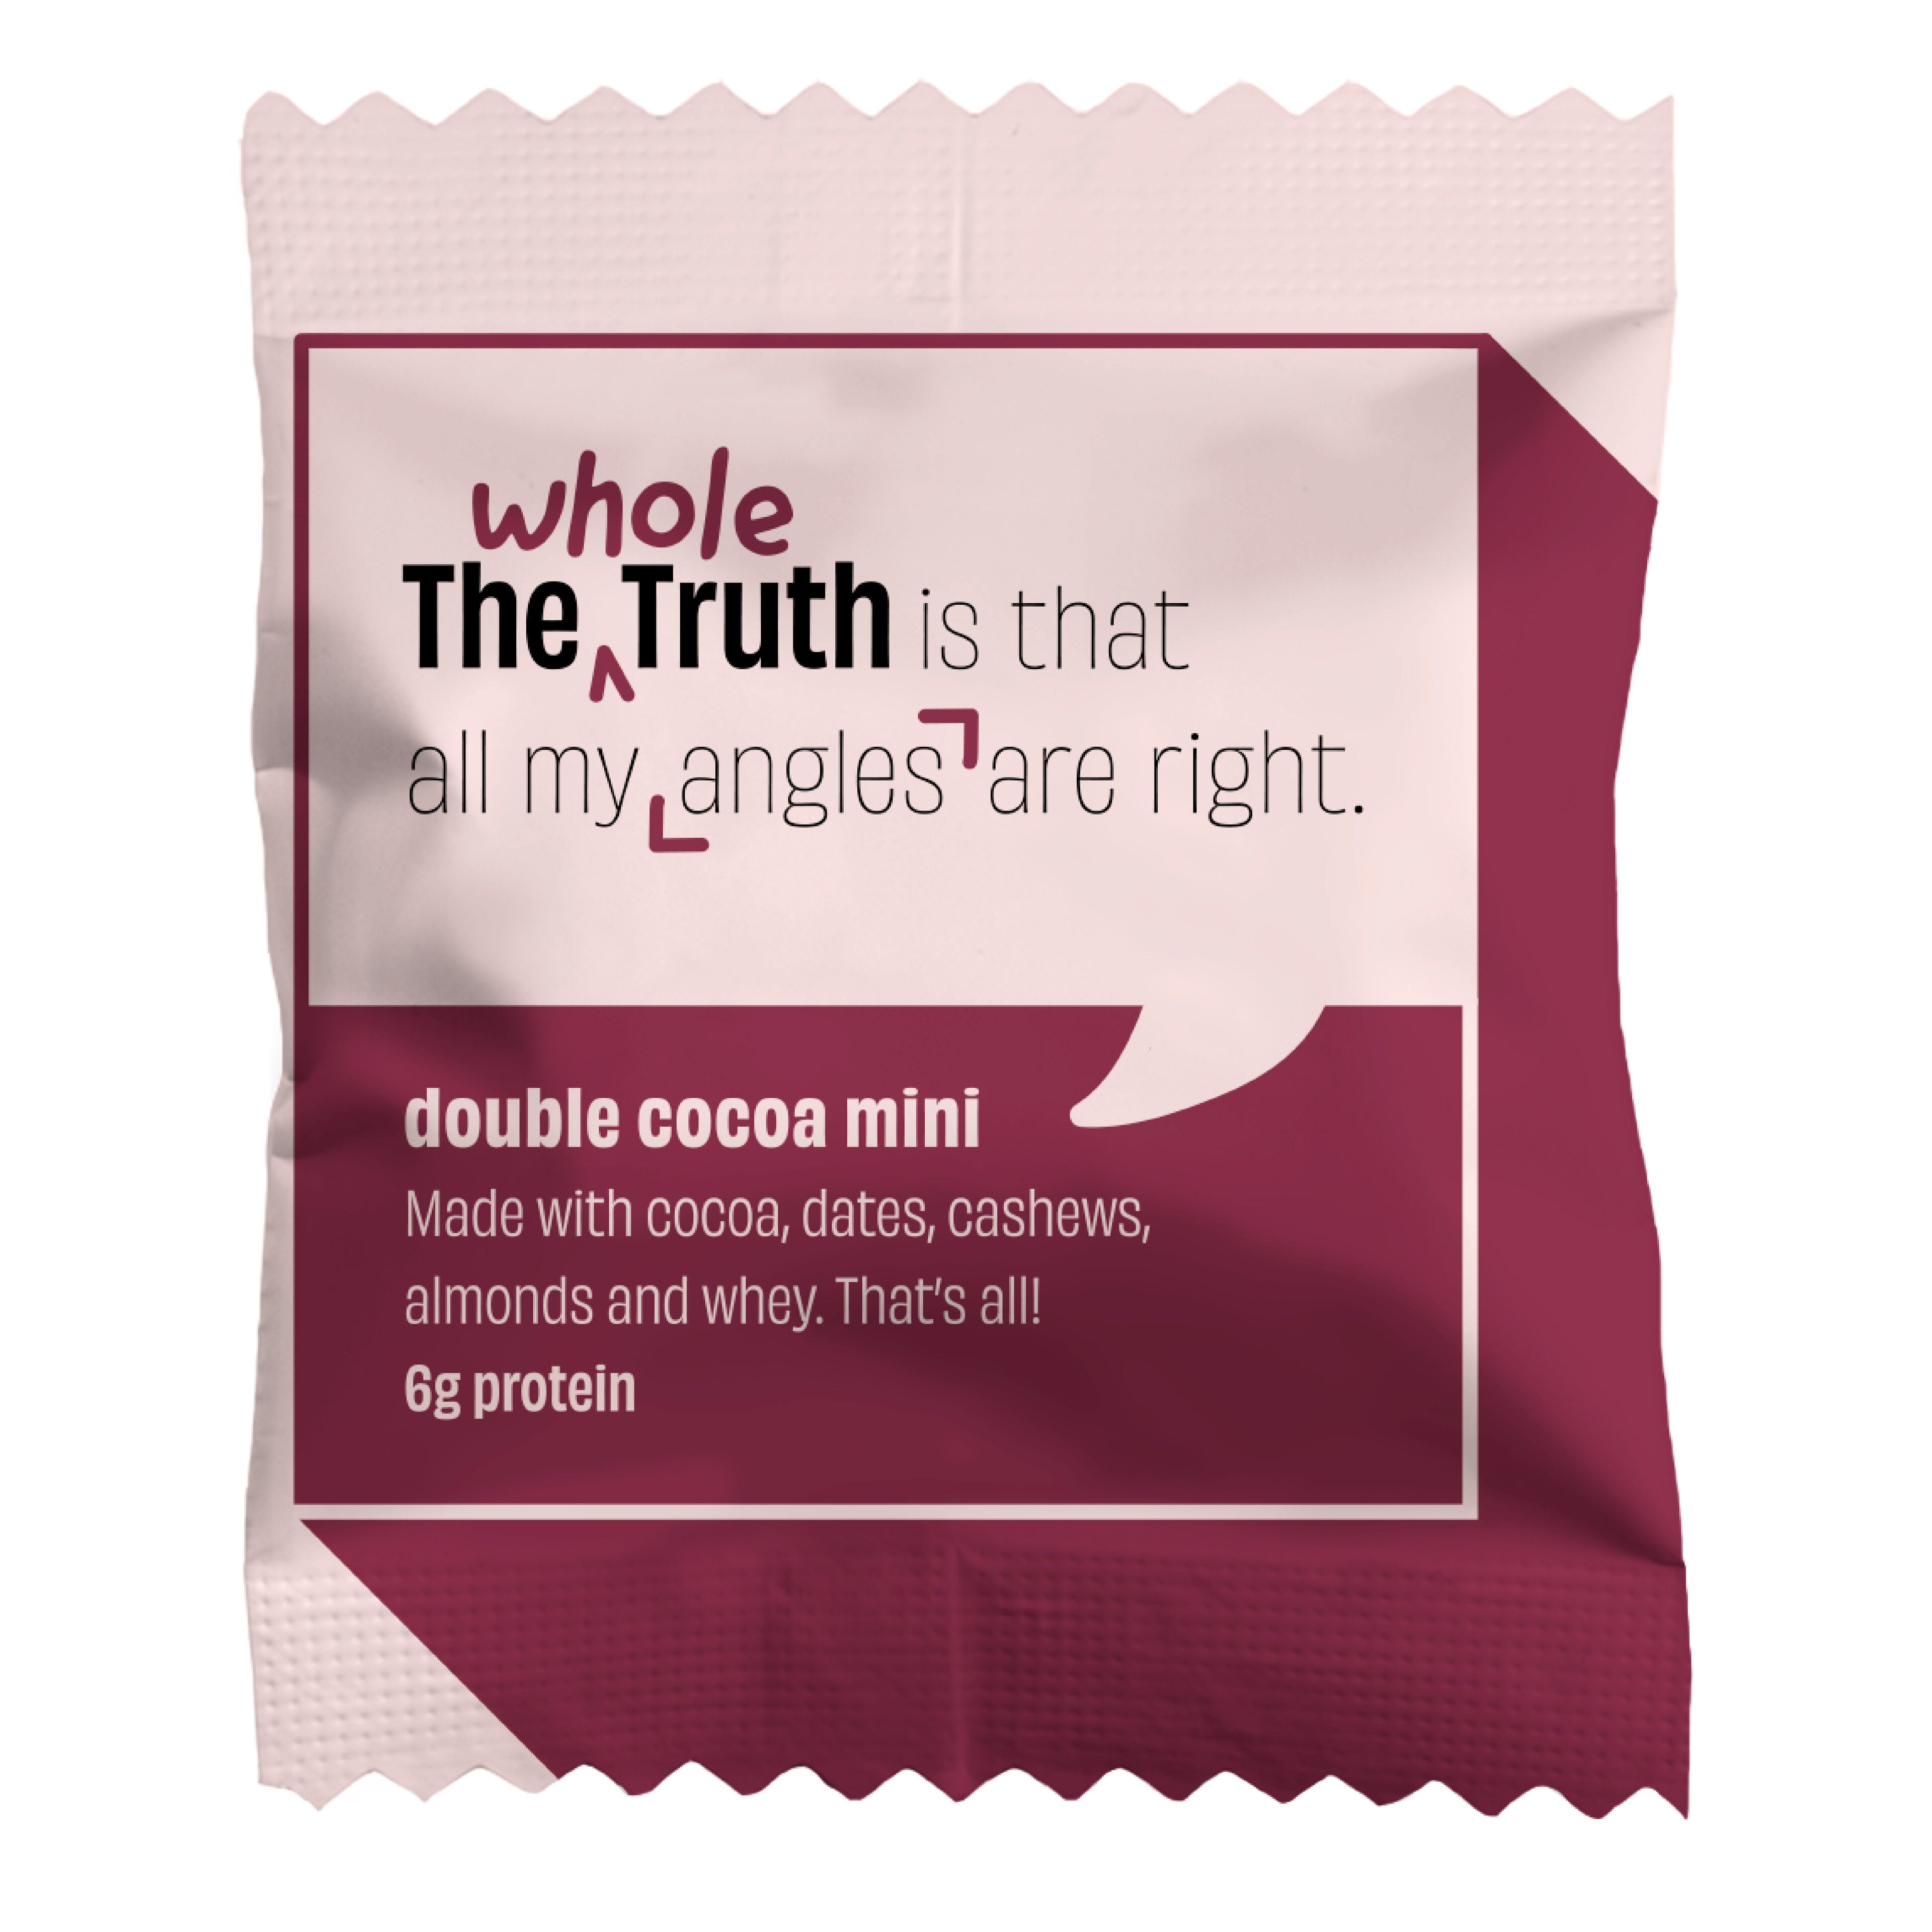 The Whole Truth - Mini Protein Bars - Double Cocoa- Pack of 8 - 8 x 27g - No Added Sugar - All Natural